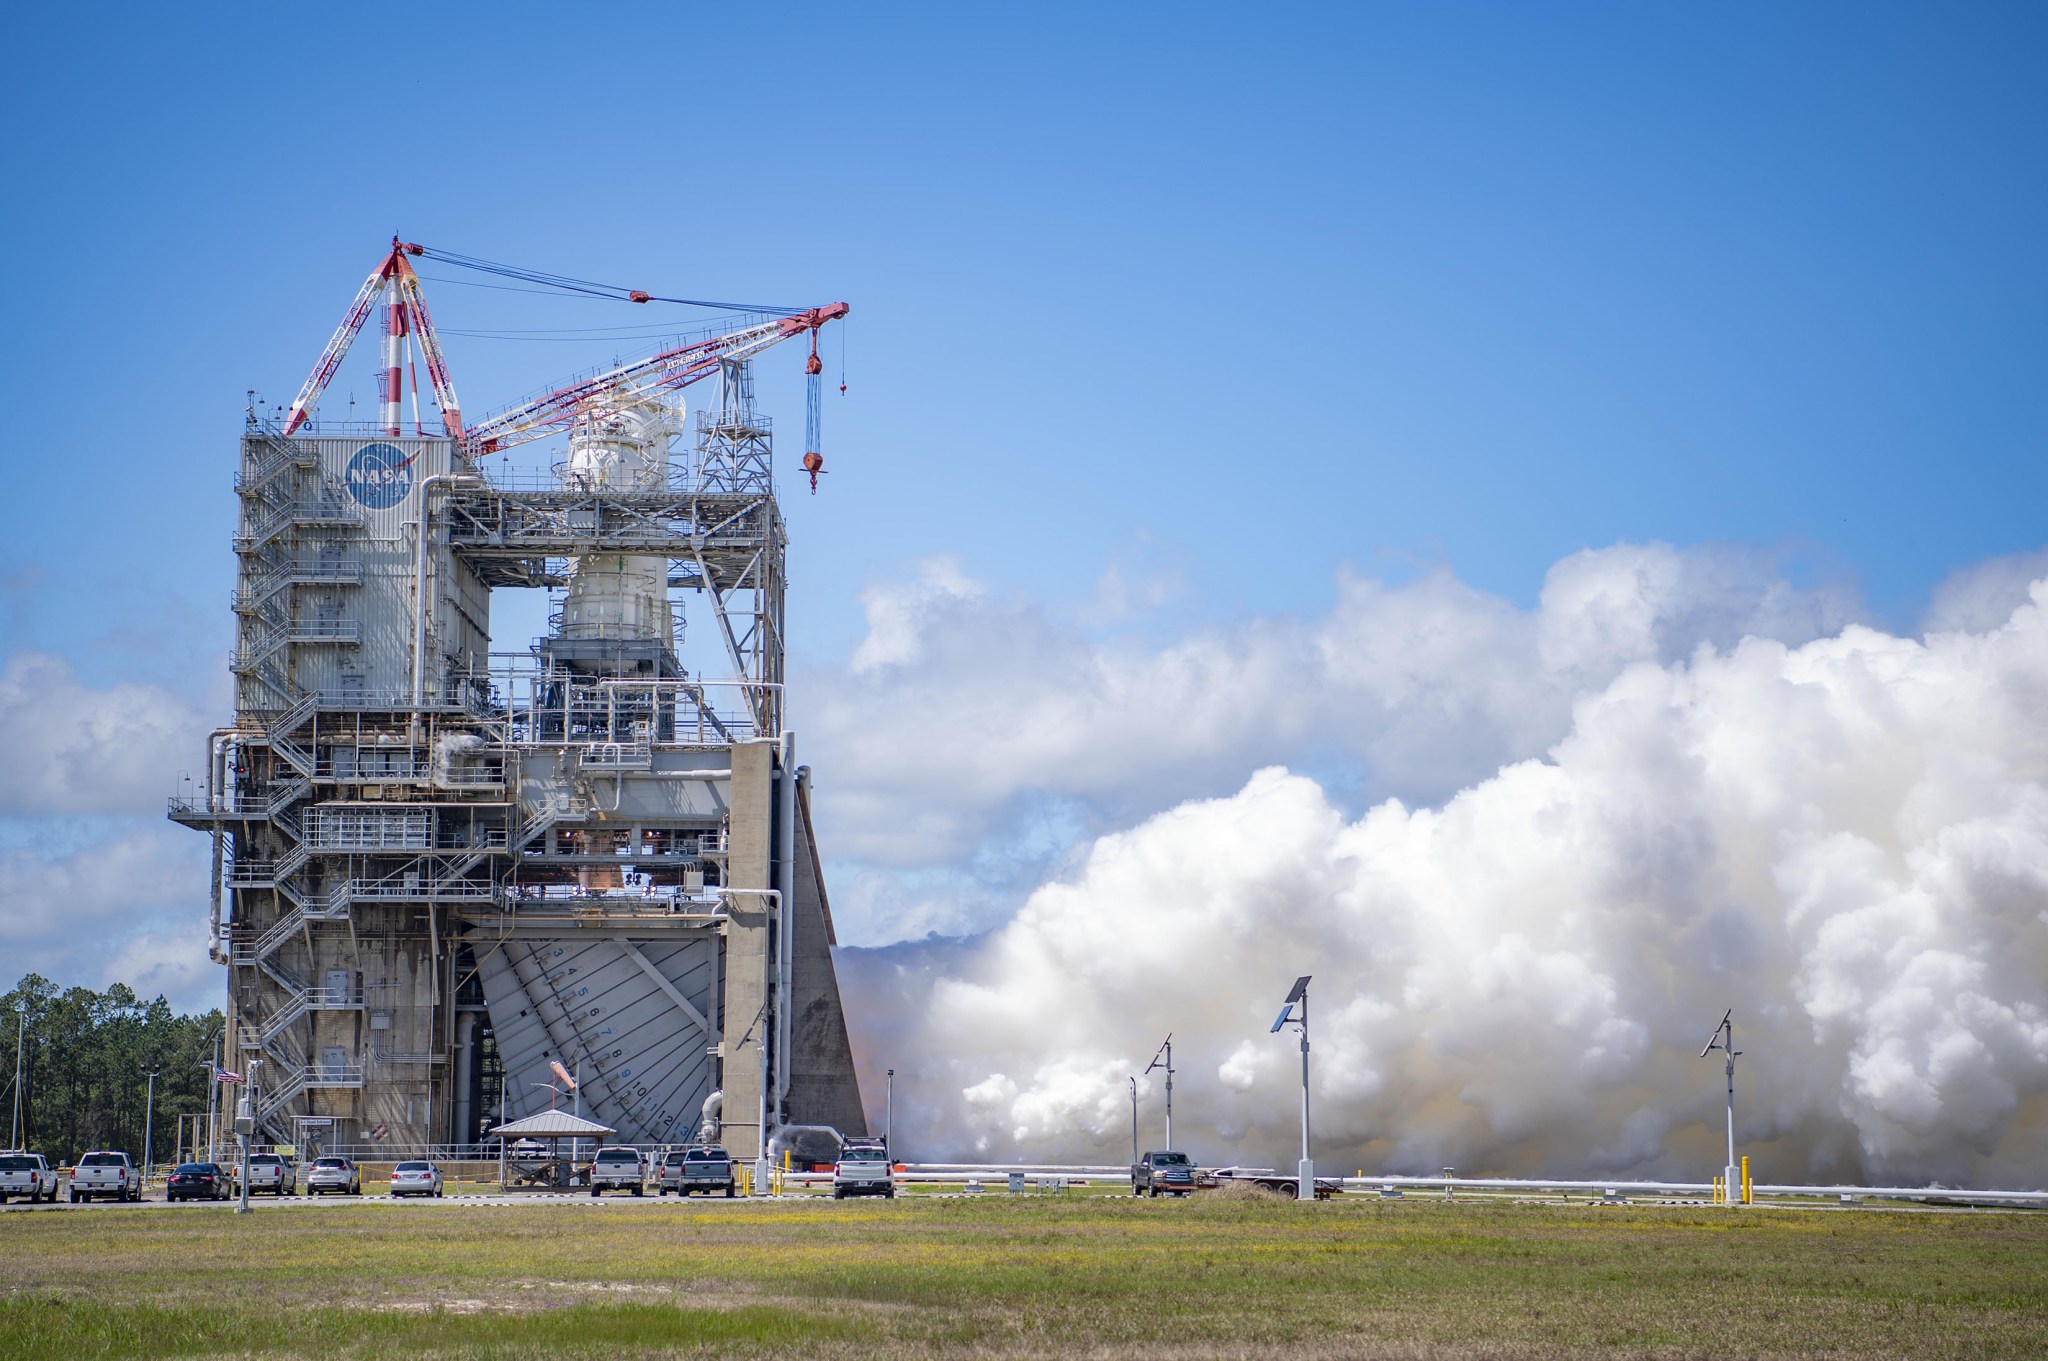 a view of the Fred Haise Test Stand during a hot fire